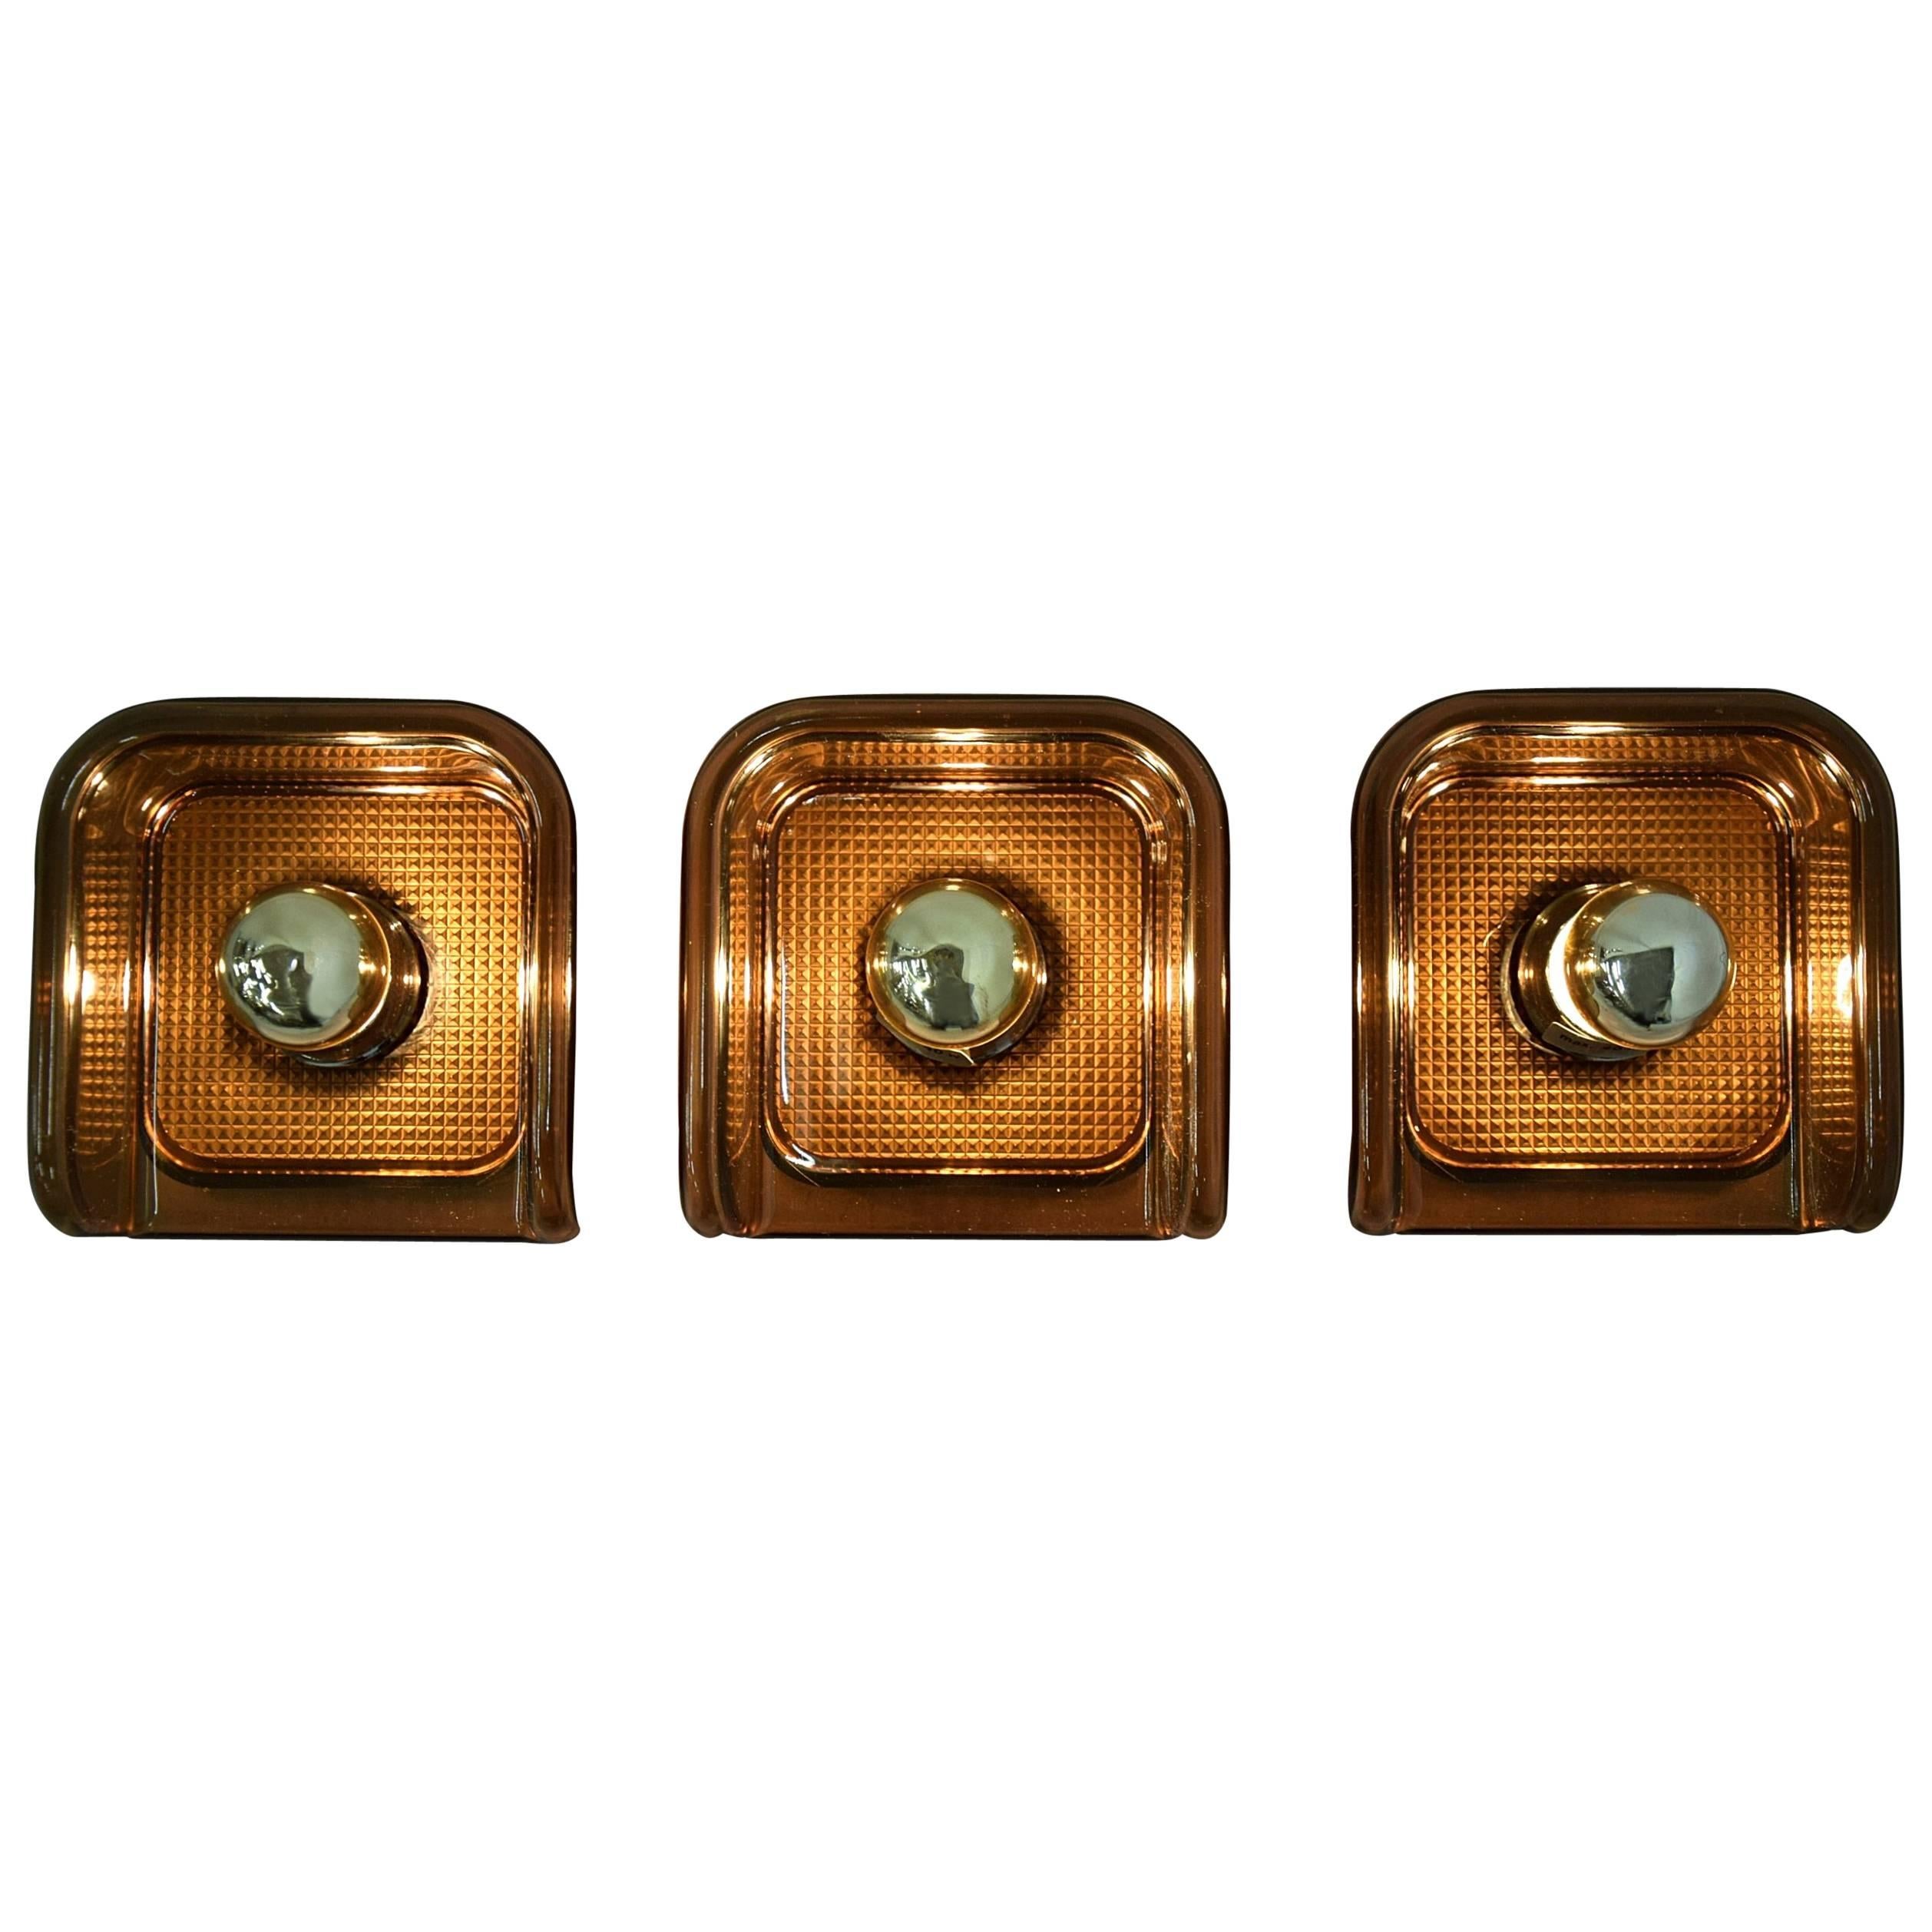 Three New old stock Guzzini sconces, 1970s. 

40 pieces available new in box.

Measurements: H 15 x W 15 x D 9 cm.

Price is for 3 pcs.